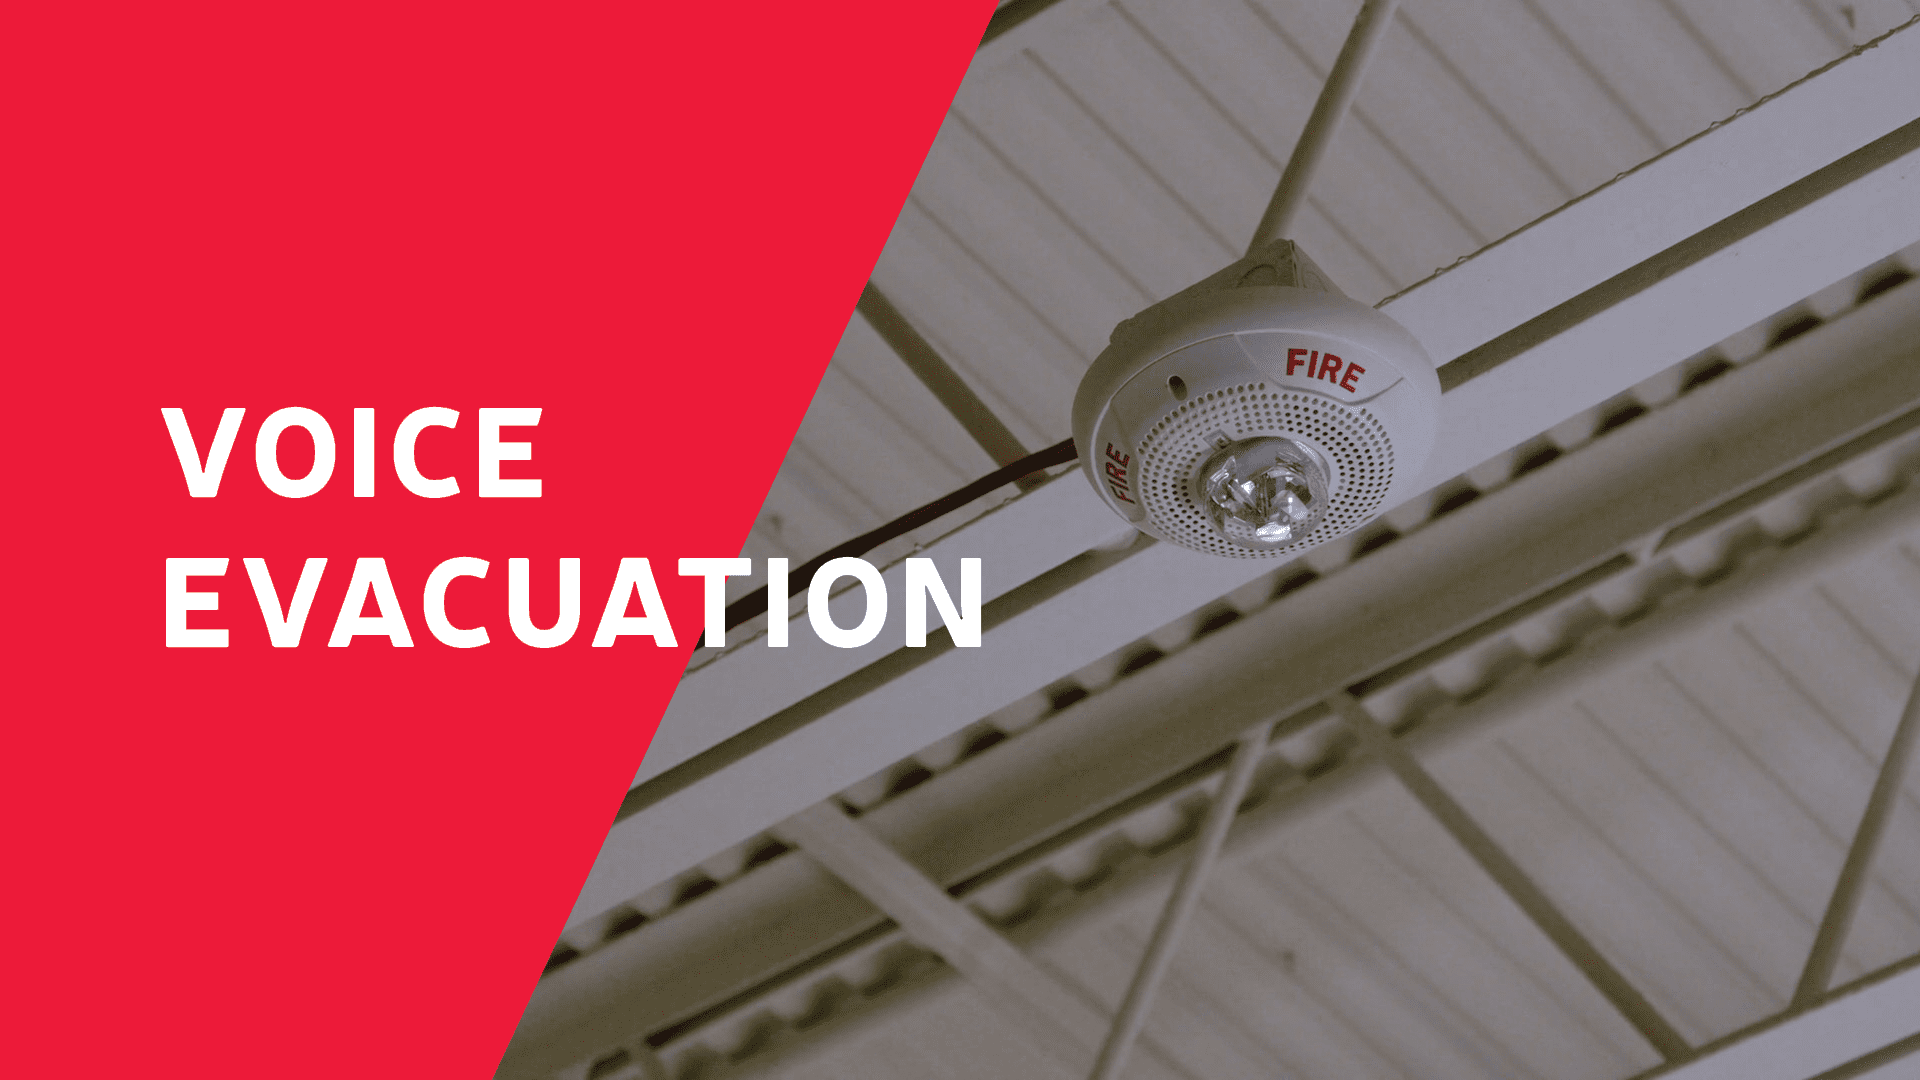 Voice Evacuation Vs “traditional” Fire Alarm Systems The Next